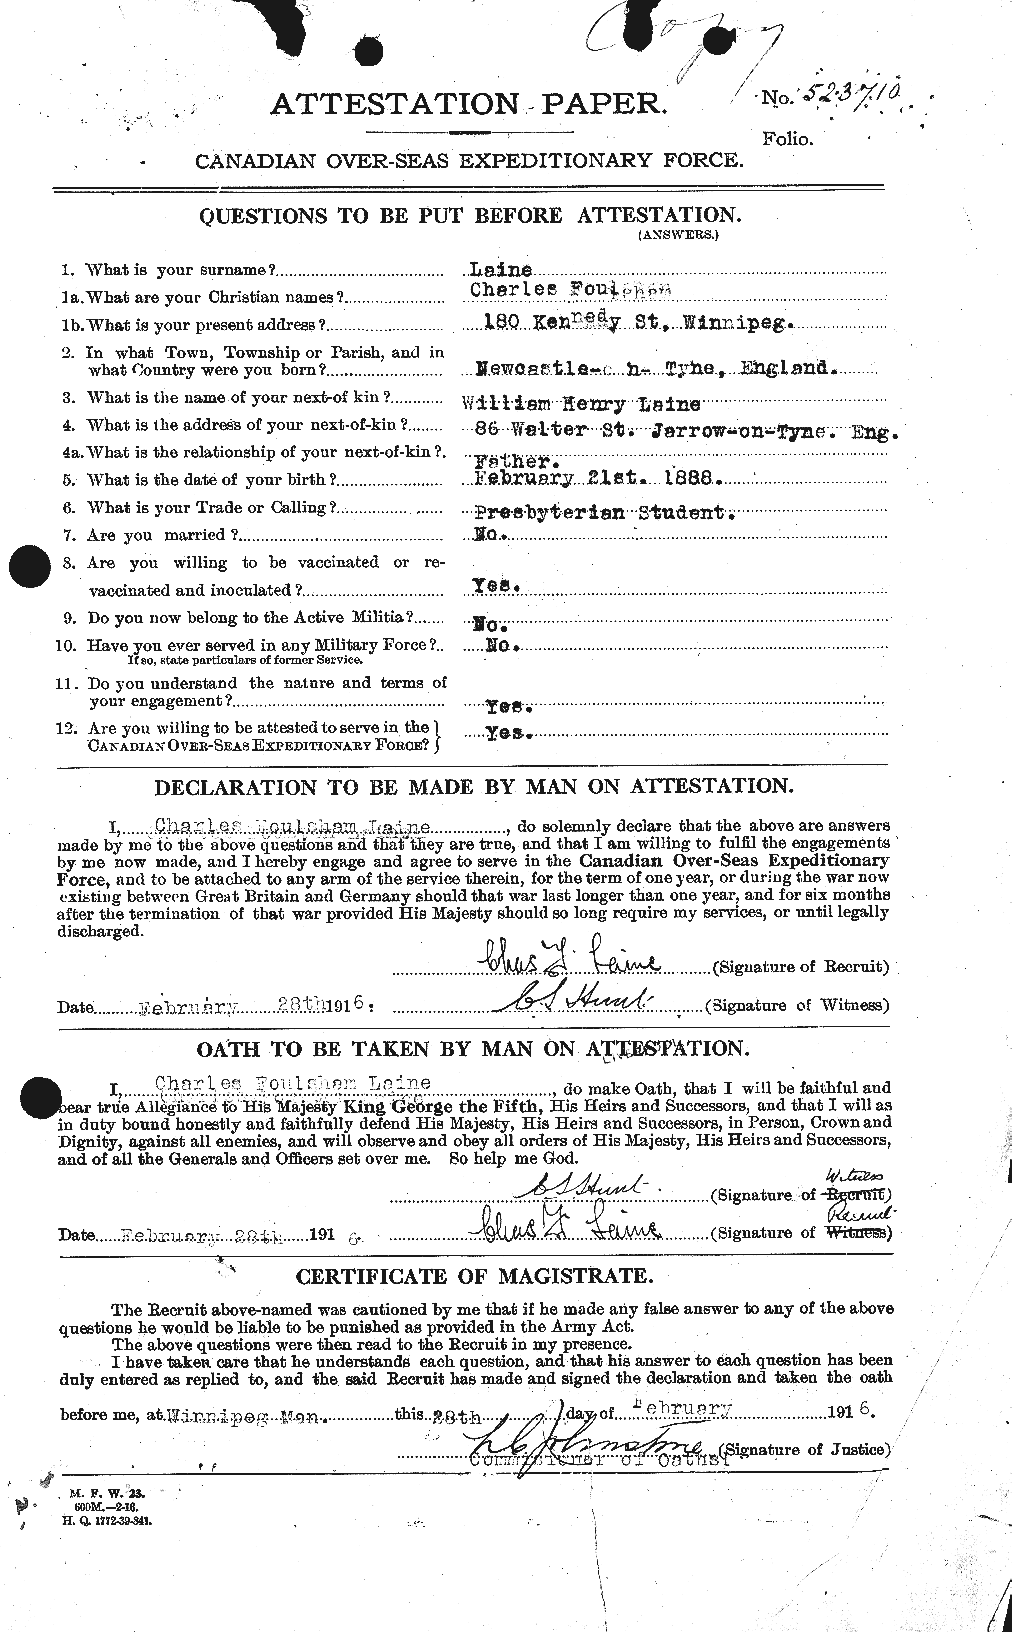 Personnel Records of the First World War - CEF 445259a